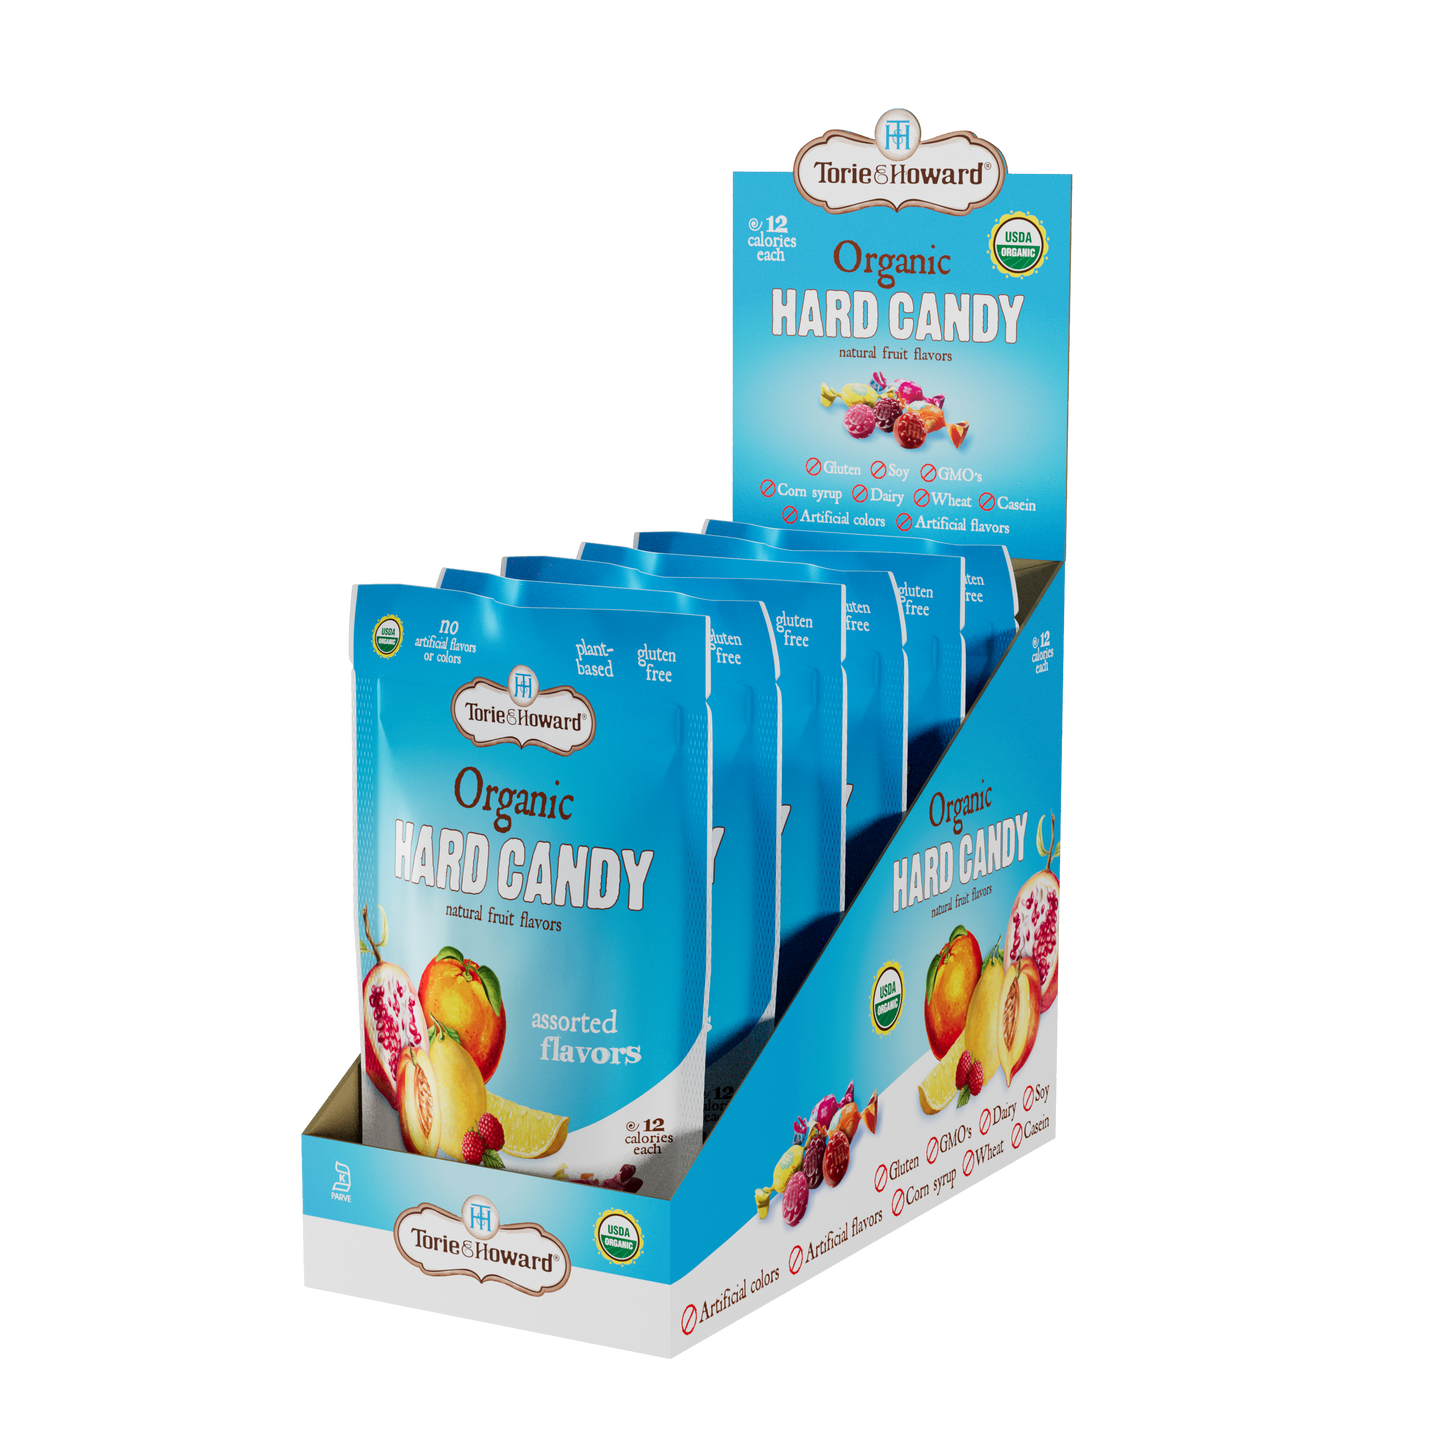 Display caddy containing 6, 3.5oz bags of Torie & Howard Organic Hard Candy in Assorted Flavors, side view